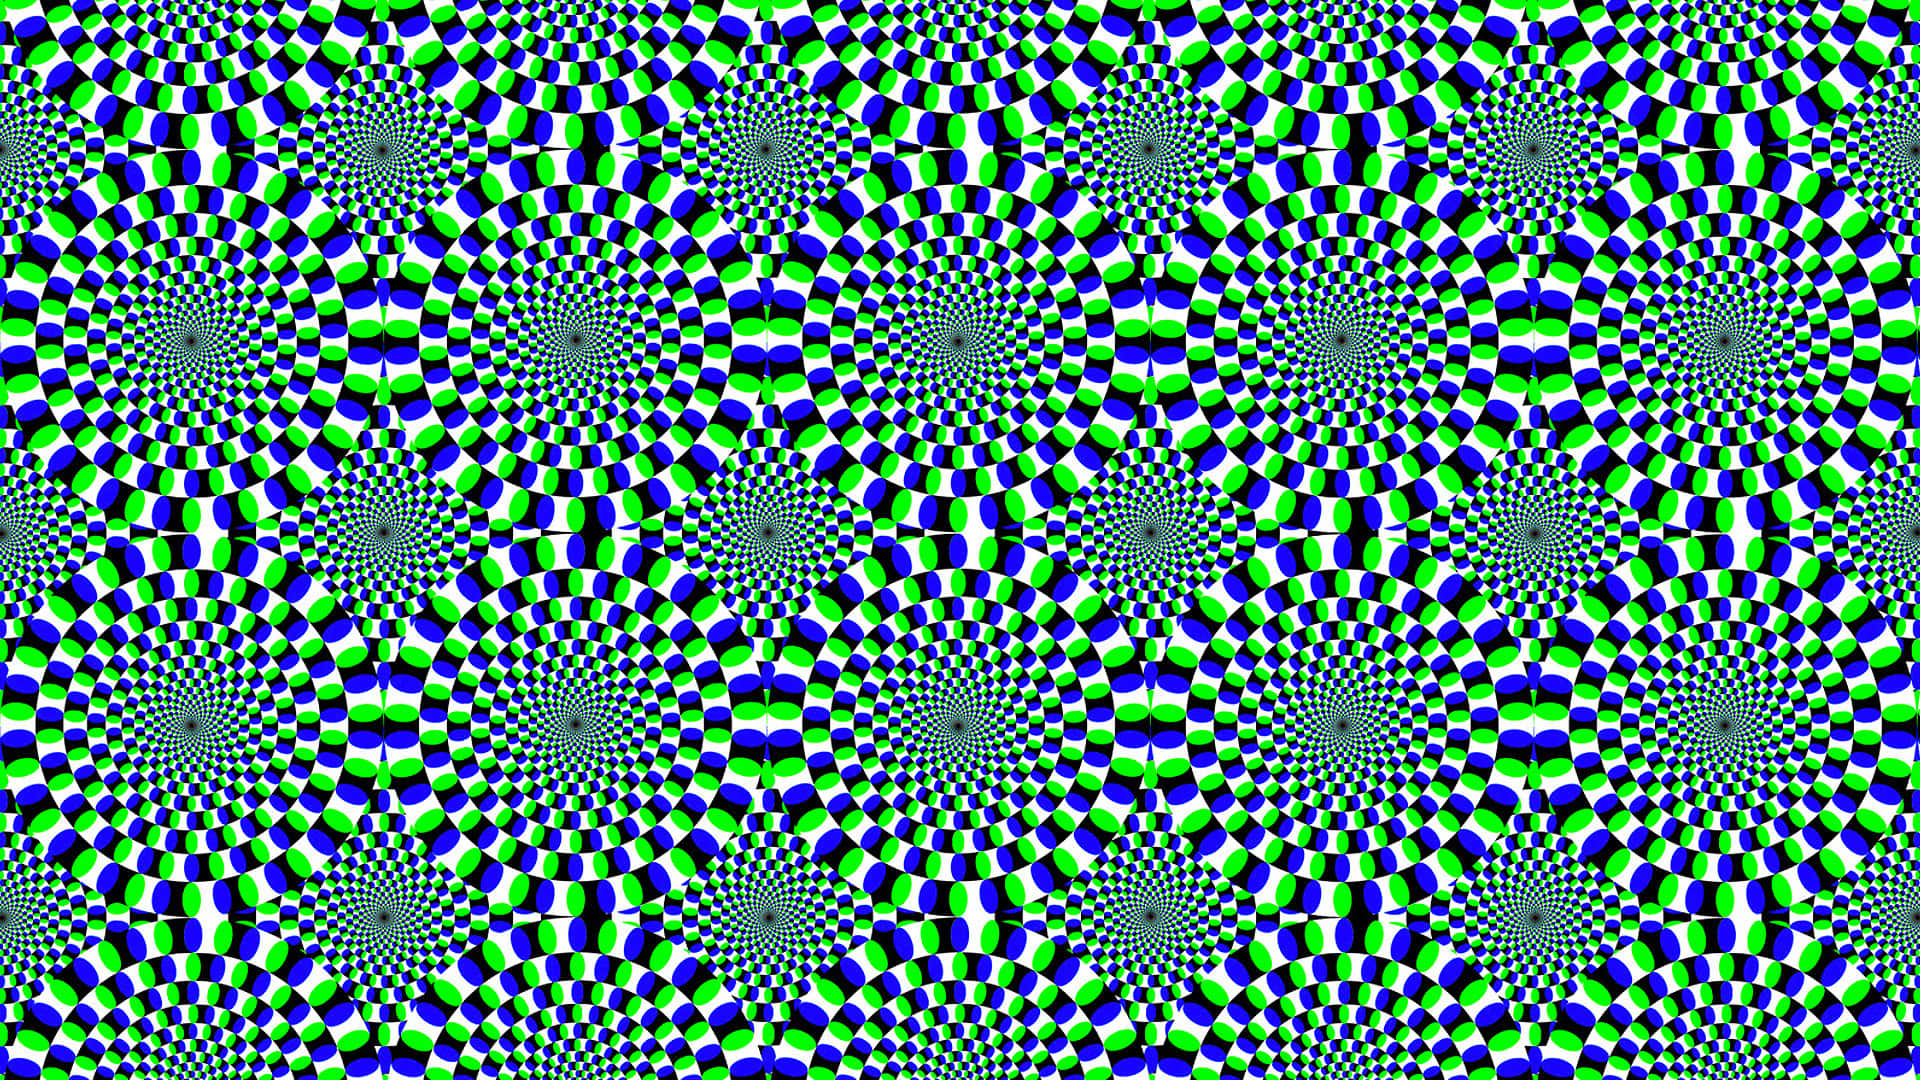 Spiral of Colors in Optical Illusion Wallpaper